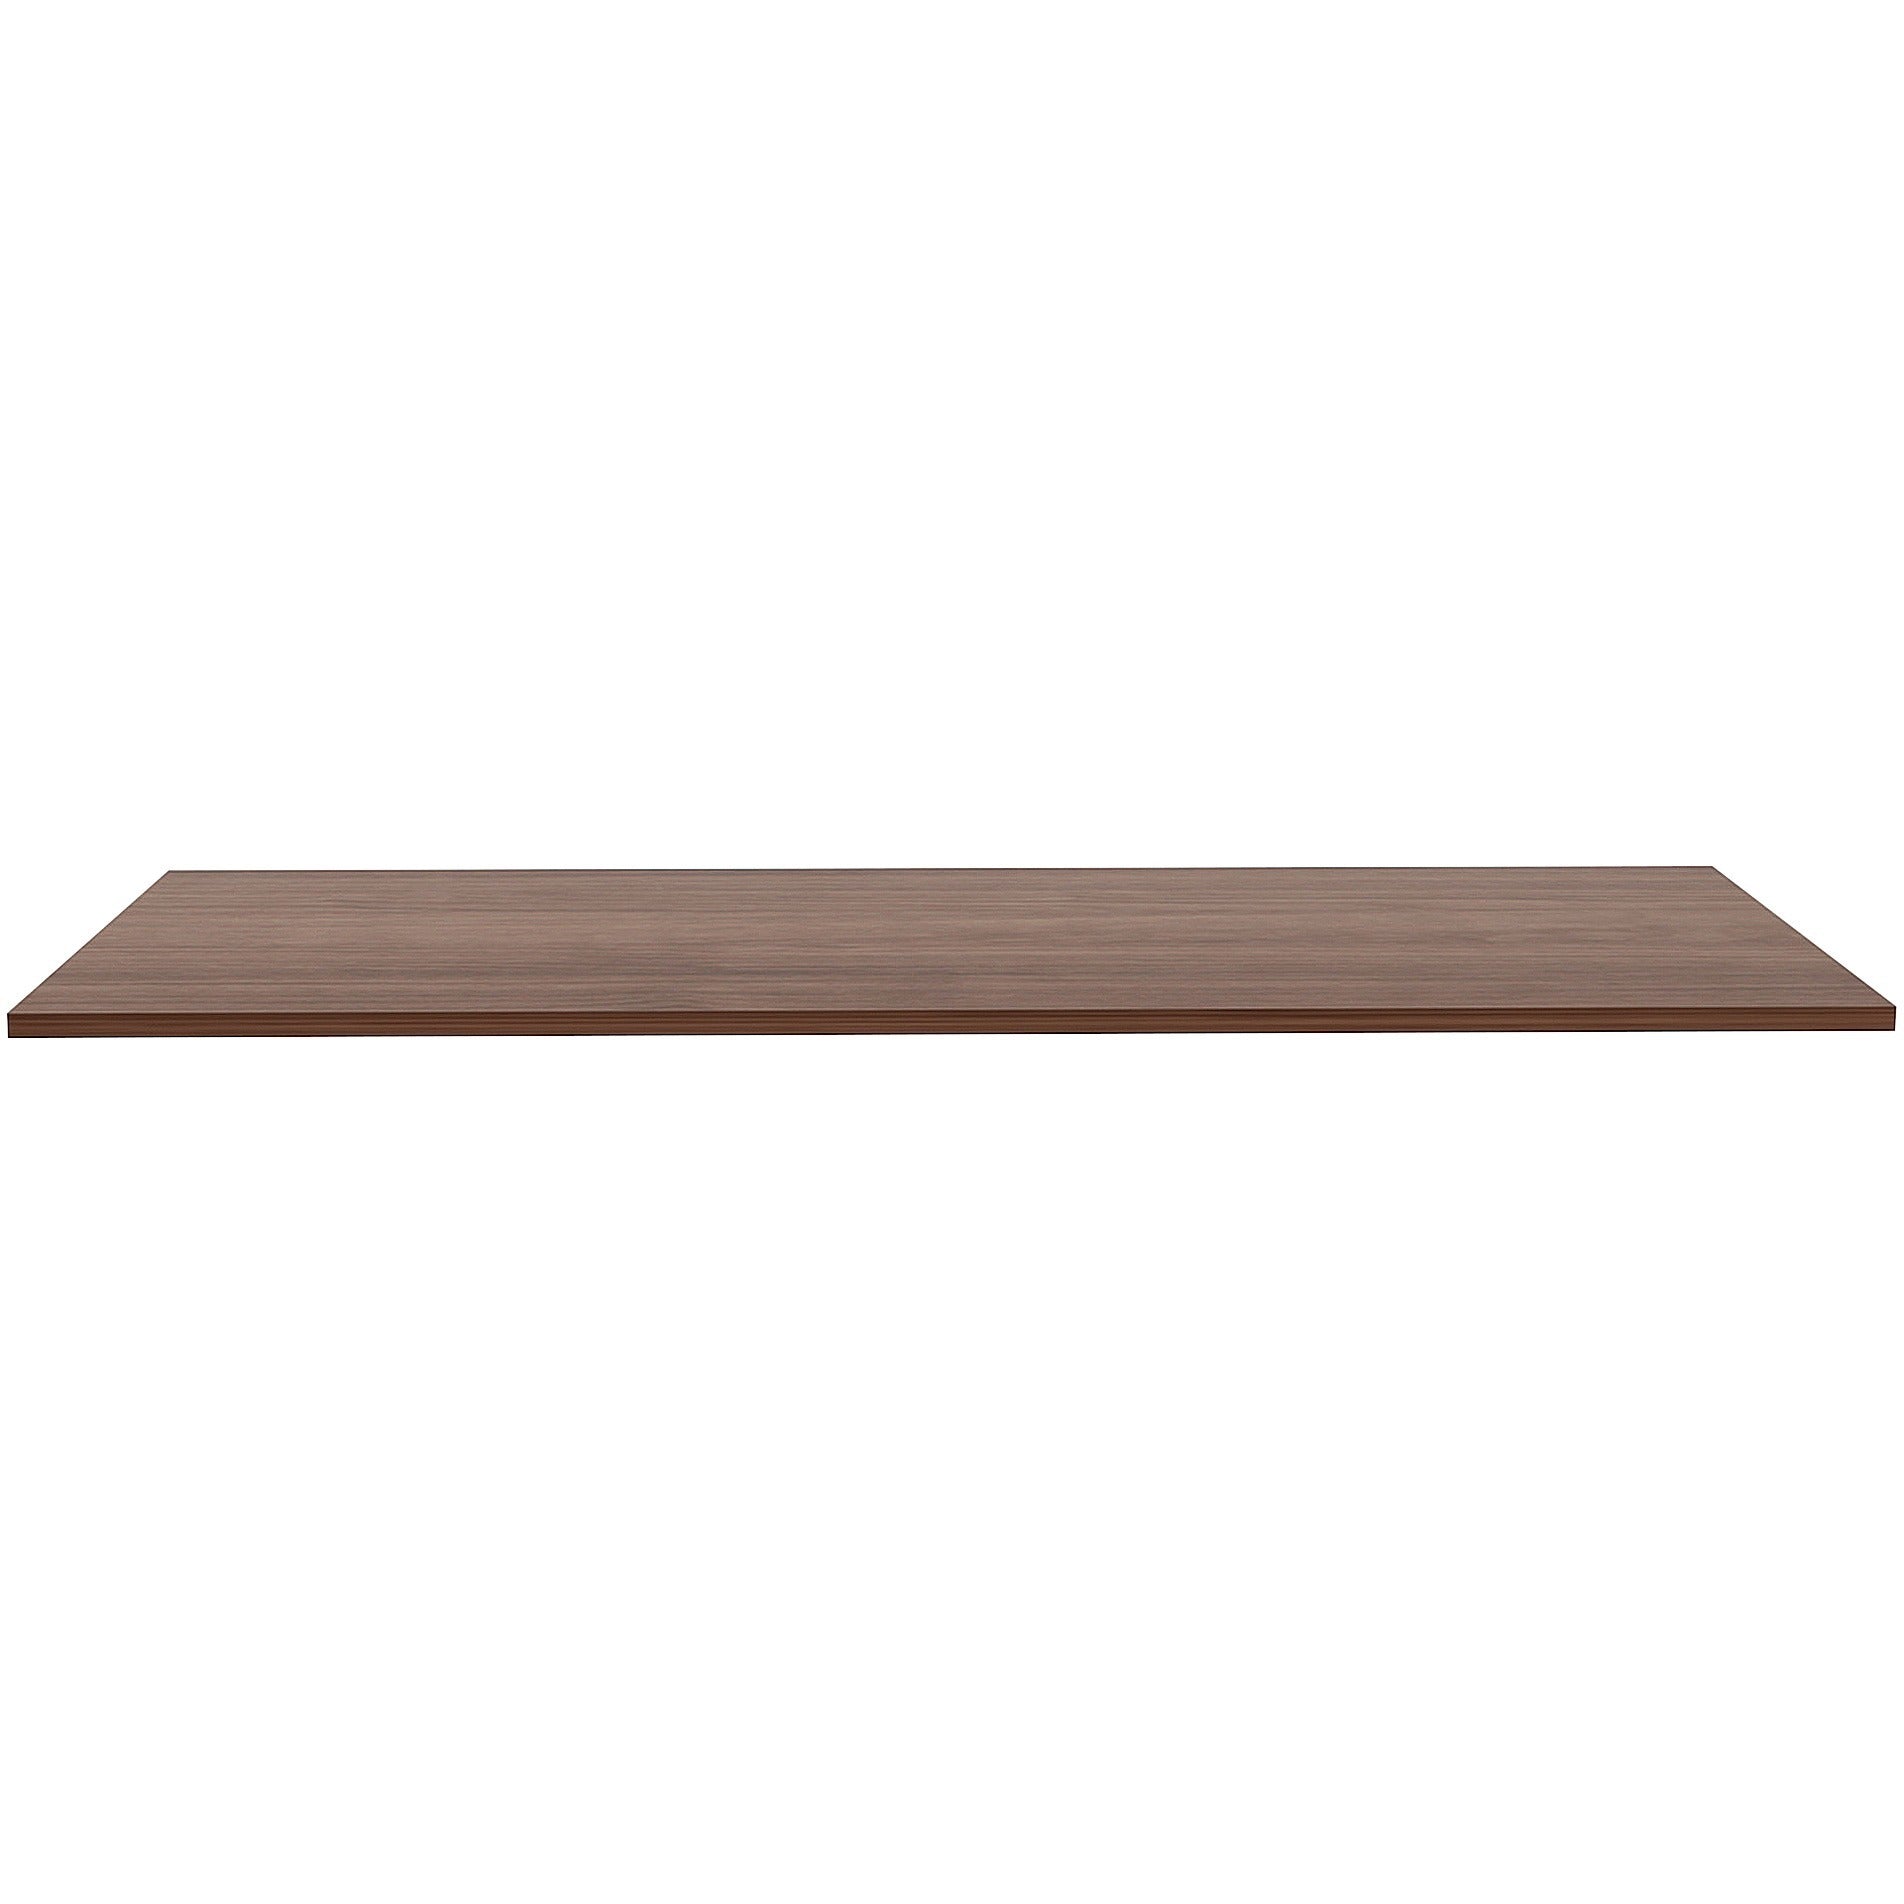 lorell-relevance-series-tabletop-for-table-topwalnut-rectangle-laminated-top-adjustable-height-x-72-table-top-width-x-30-table-top-depth-x-1-table-top-thickness-assembly-required-1-each_llr34407 - 2